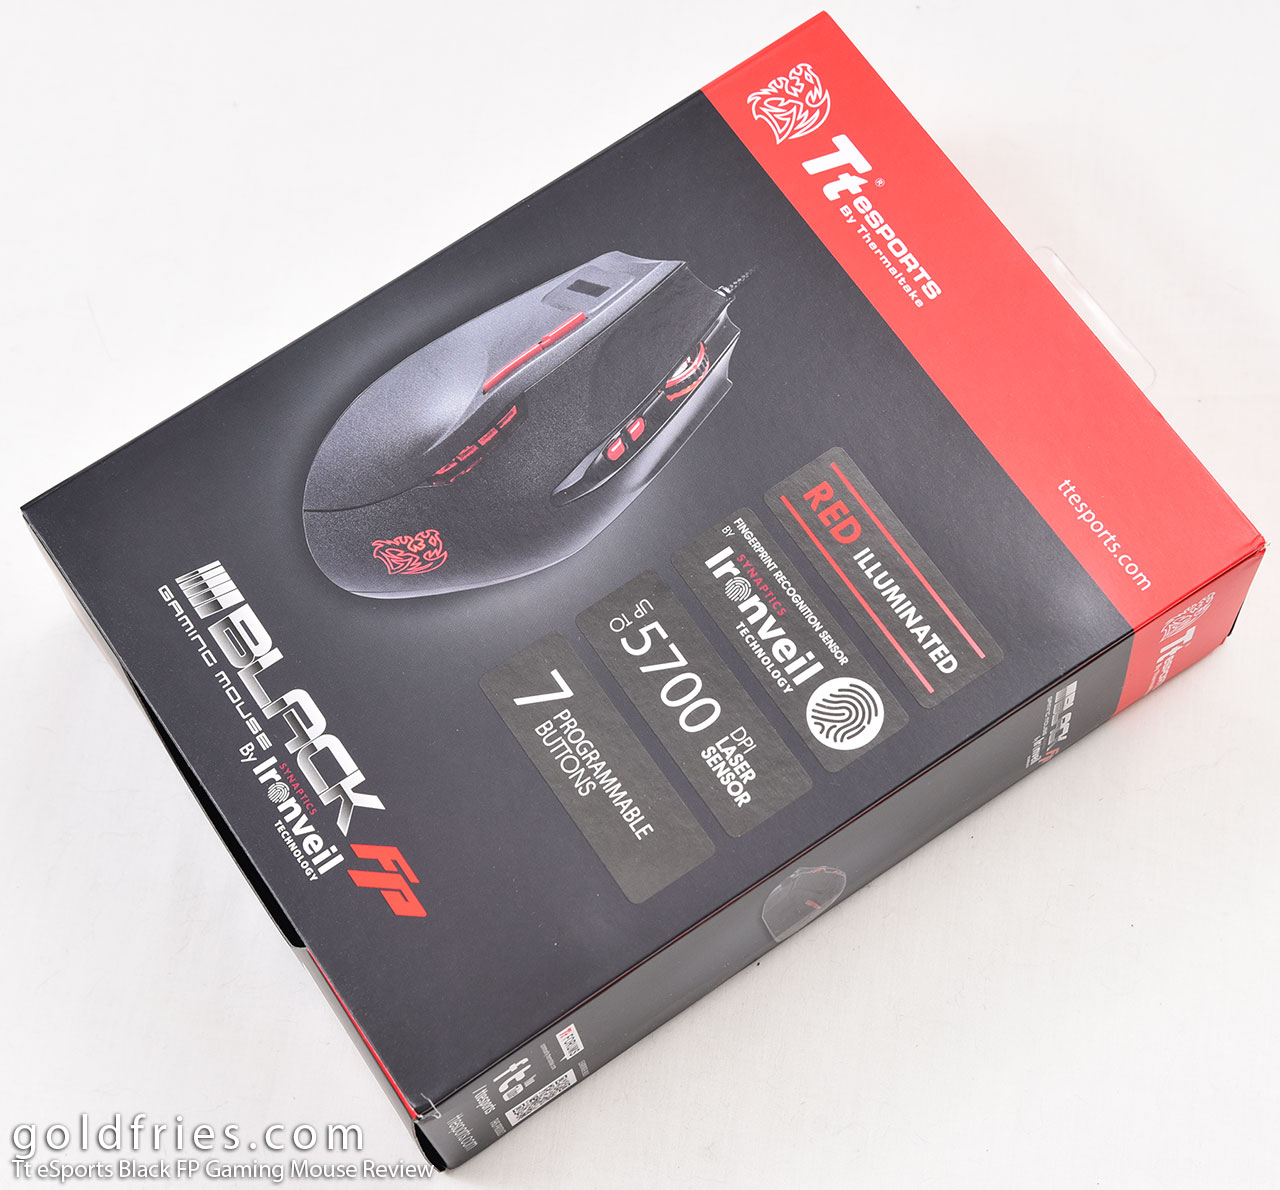 Tt eSports Black FP Gaming Mouse Review